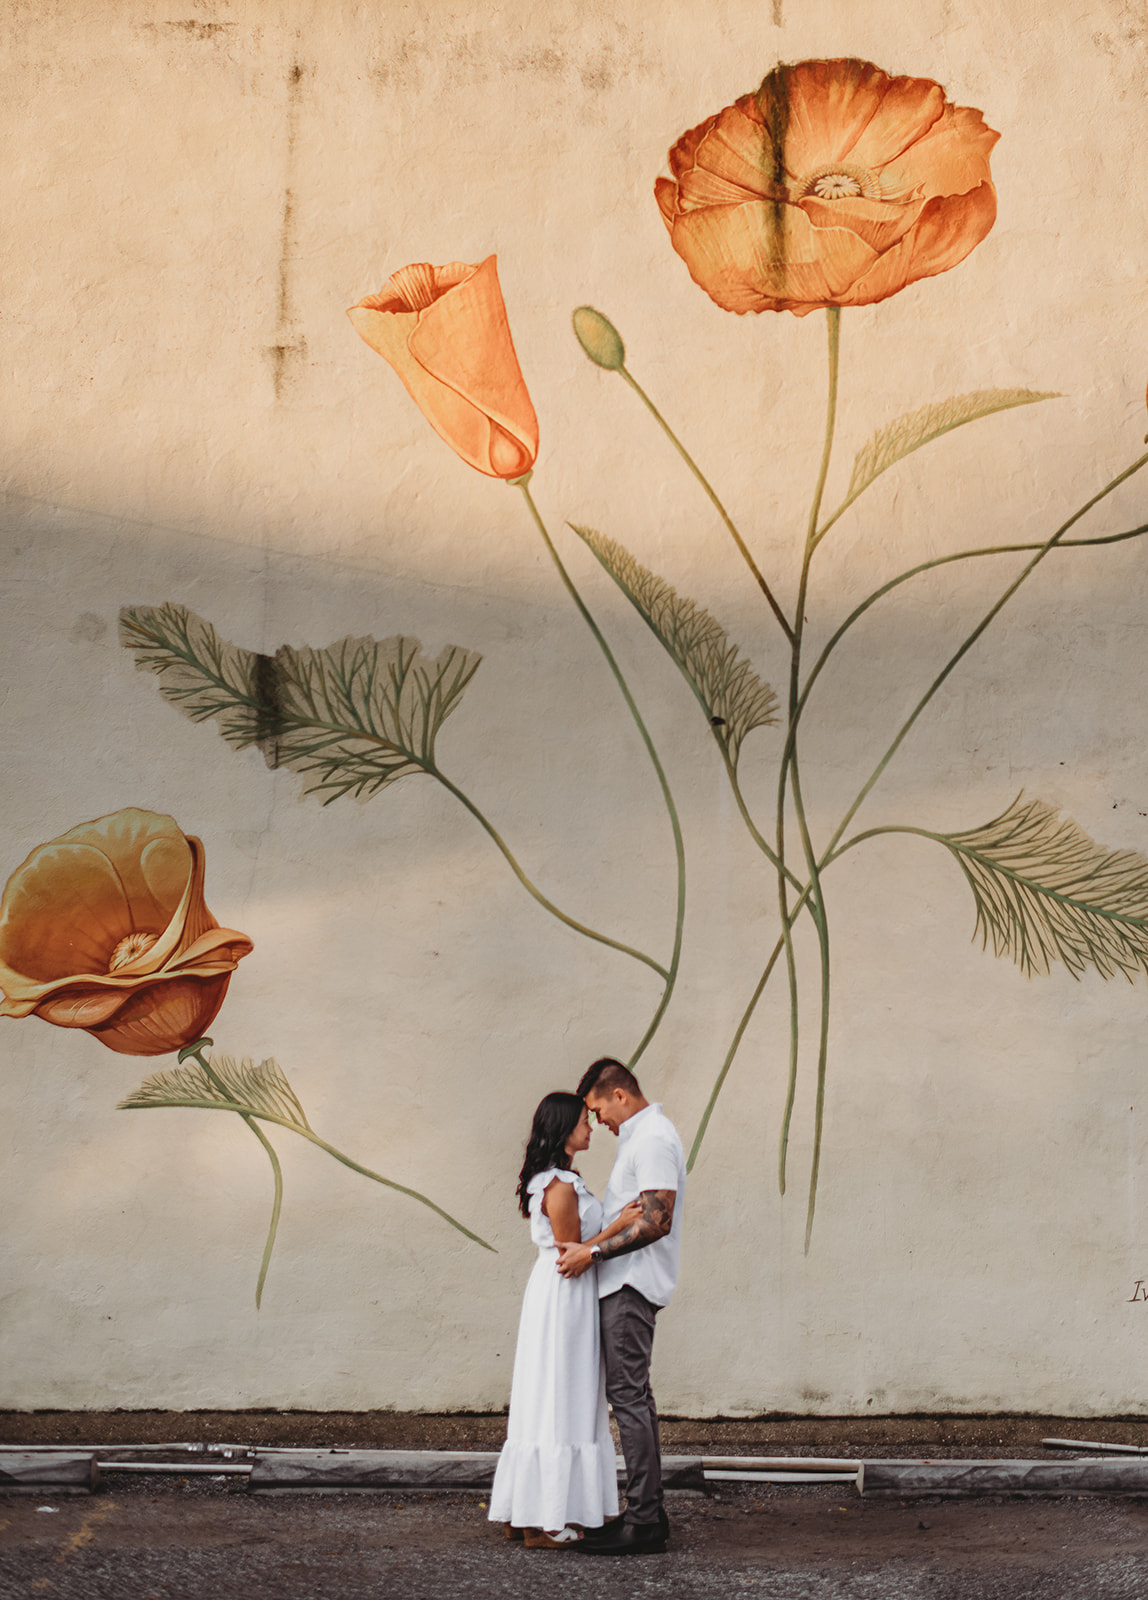 downtown engagement session in Georgetown Washington DC with man in a white shirt and dark pant holding a woman in a long white dress in front of a large wall art mural of boho florals